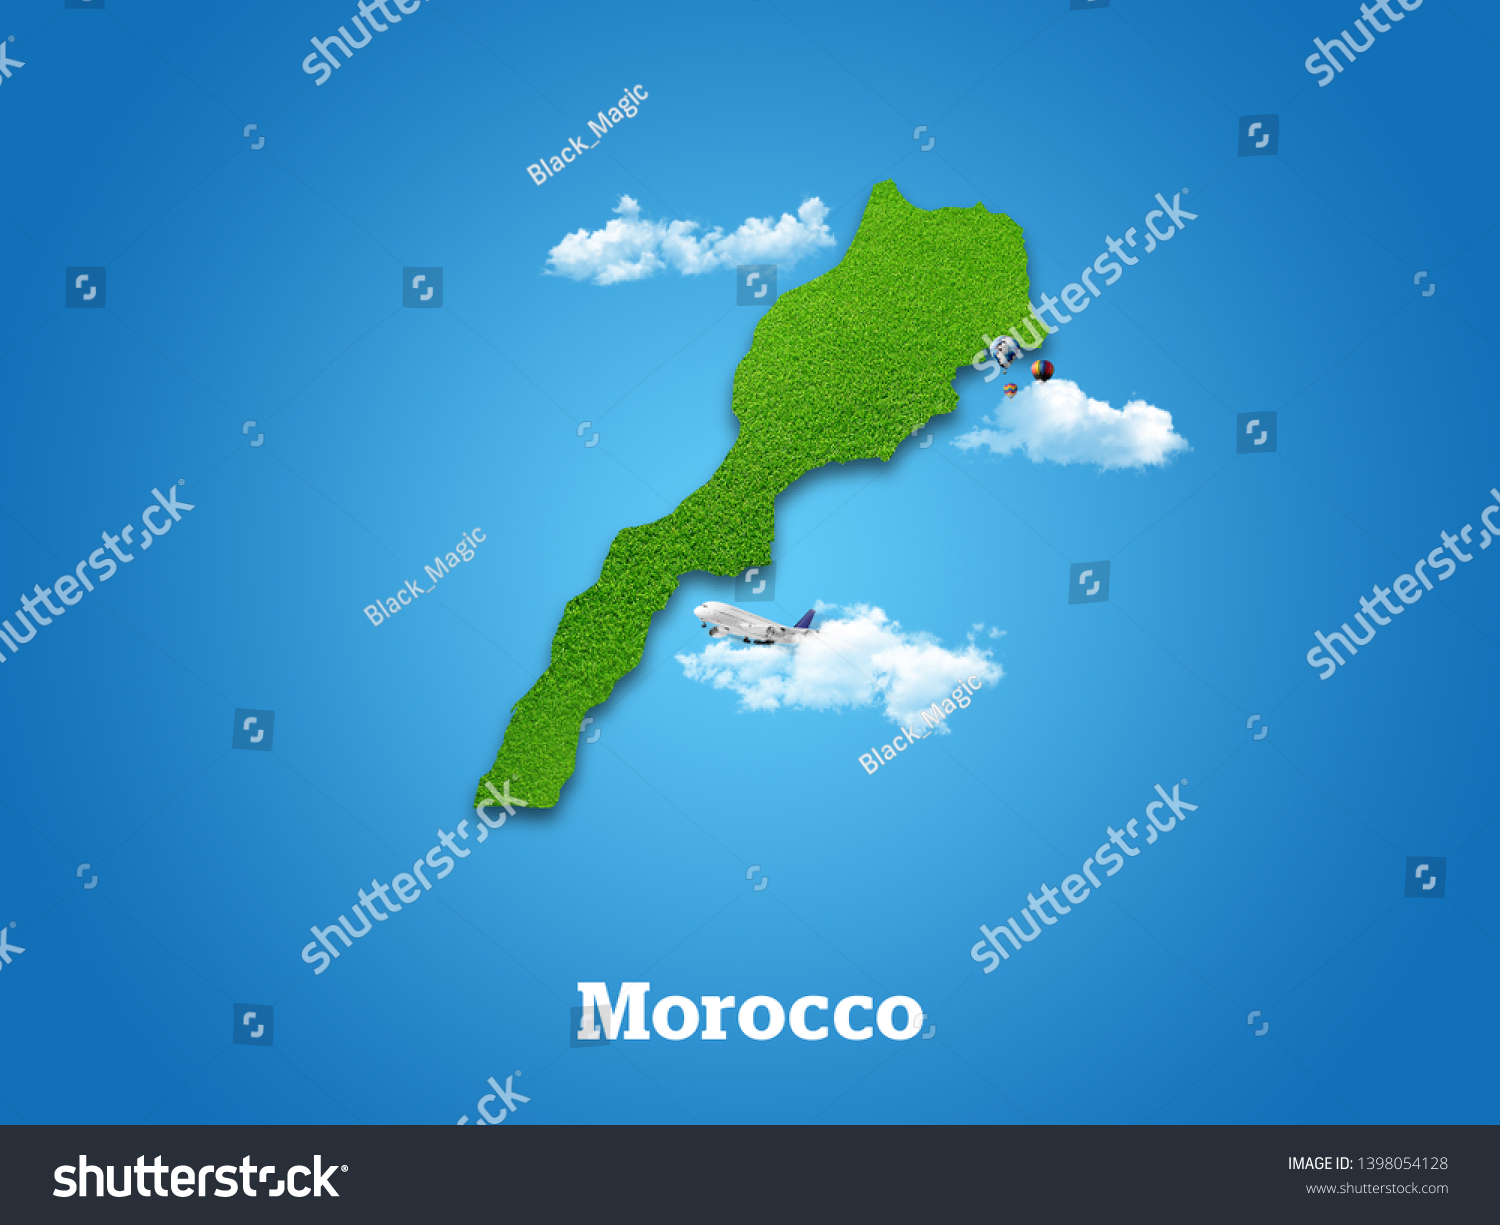 Morocco Map. Green grass, sky and cloudy concept. #1398054128